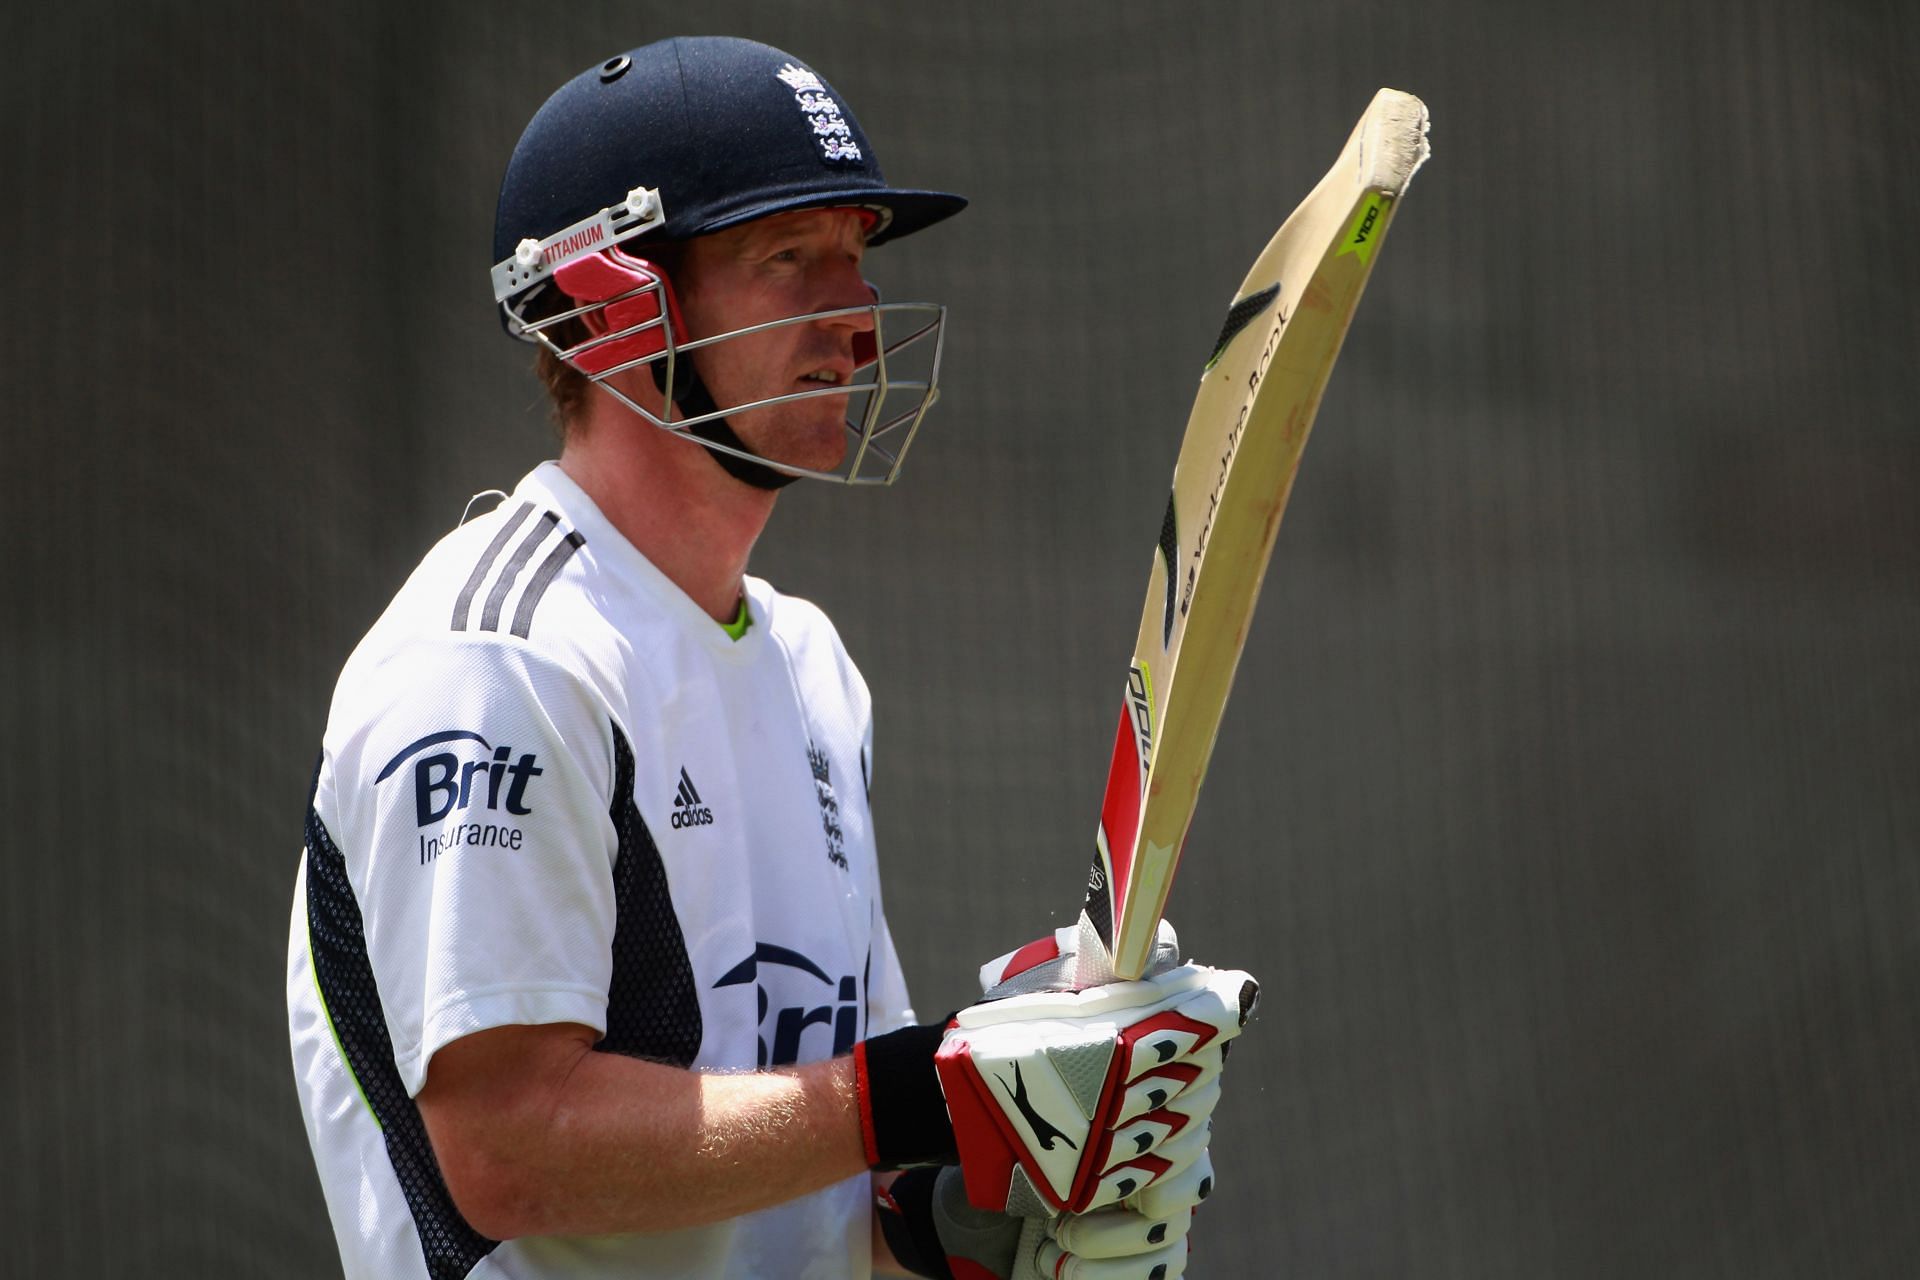 Paul Collingwood could never really shine in India